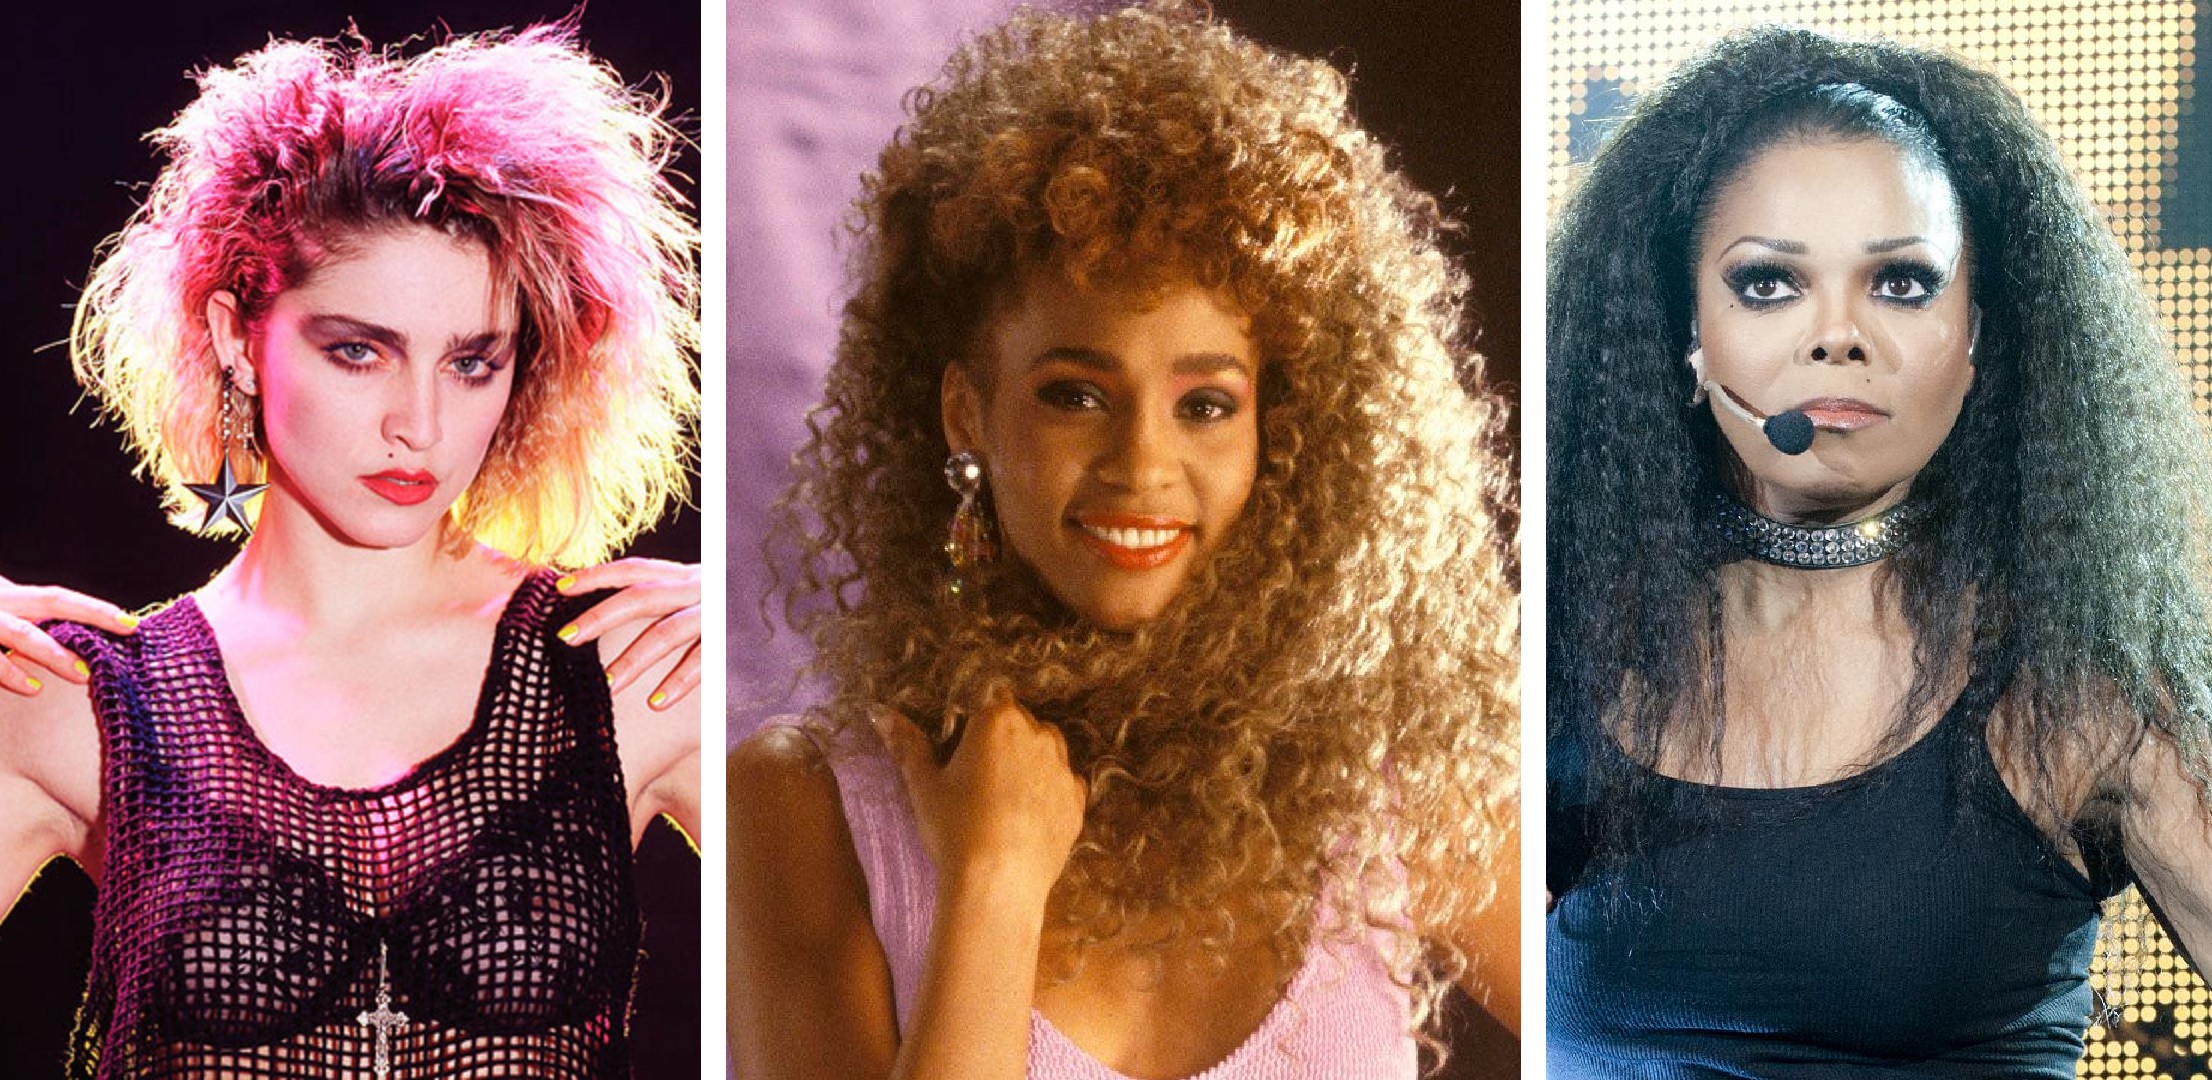 While Michael Jackson Is The Undisputed King Of Pop, Who Is the Queen Of Pop? Vote Here!